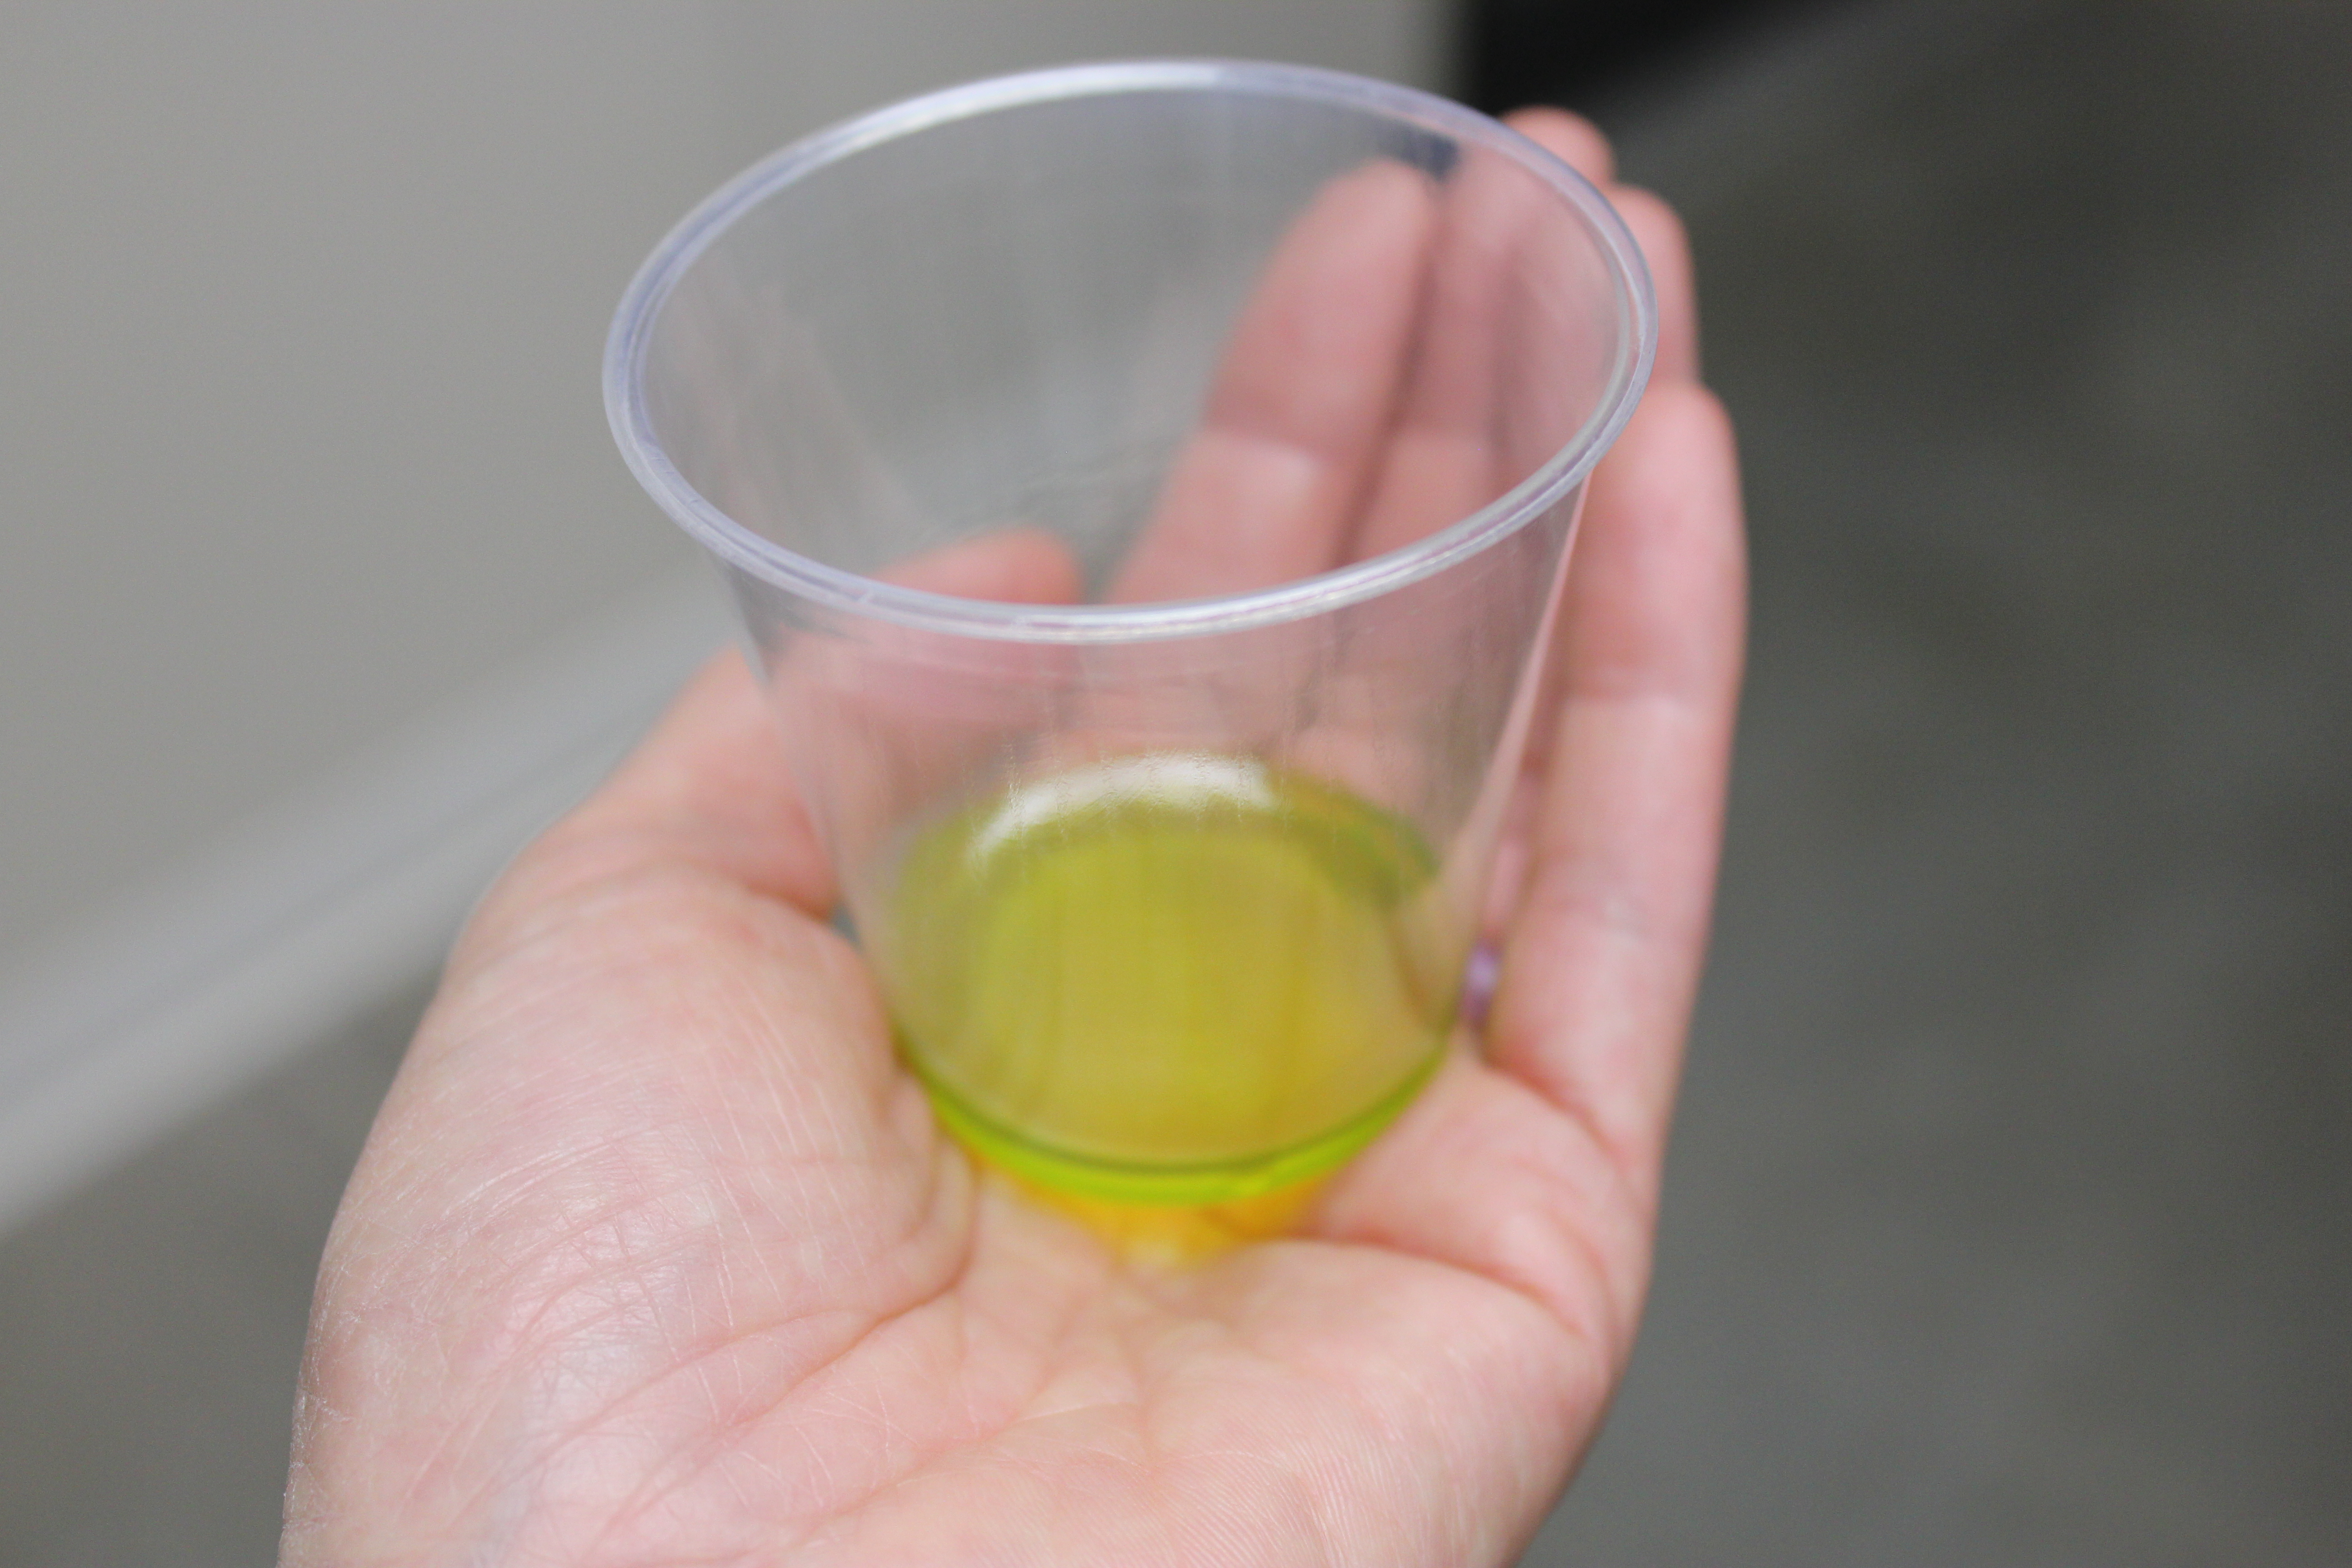 plastic cup with less than a tablespoon of olive oil, held in palm of hand.